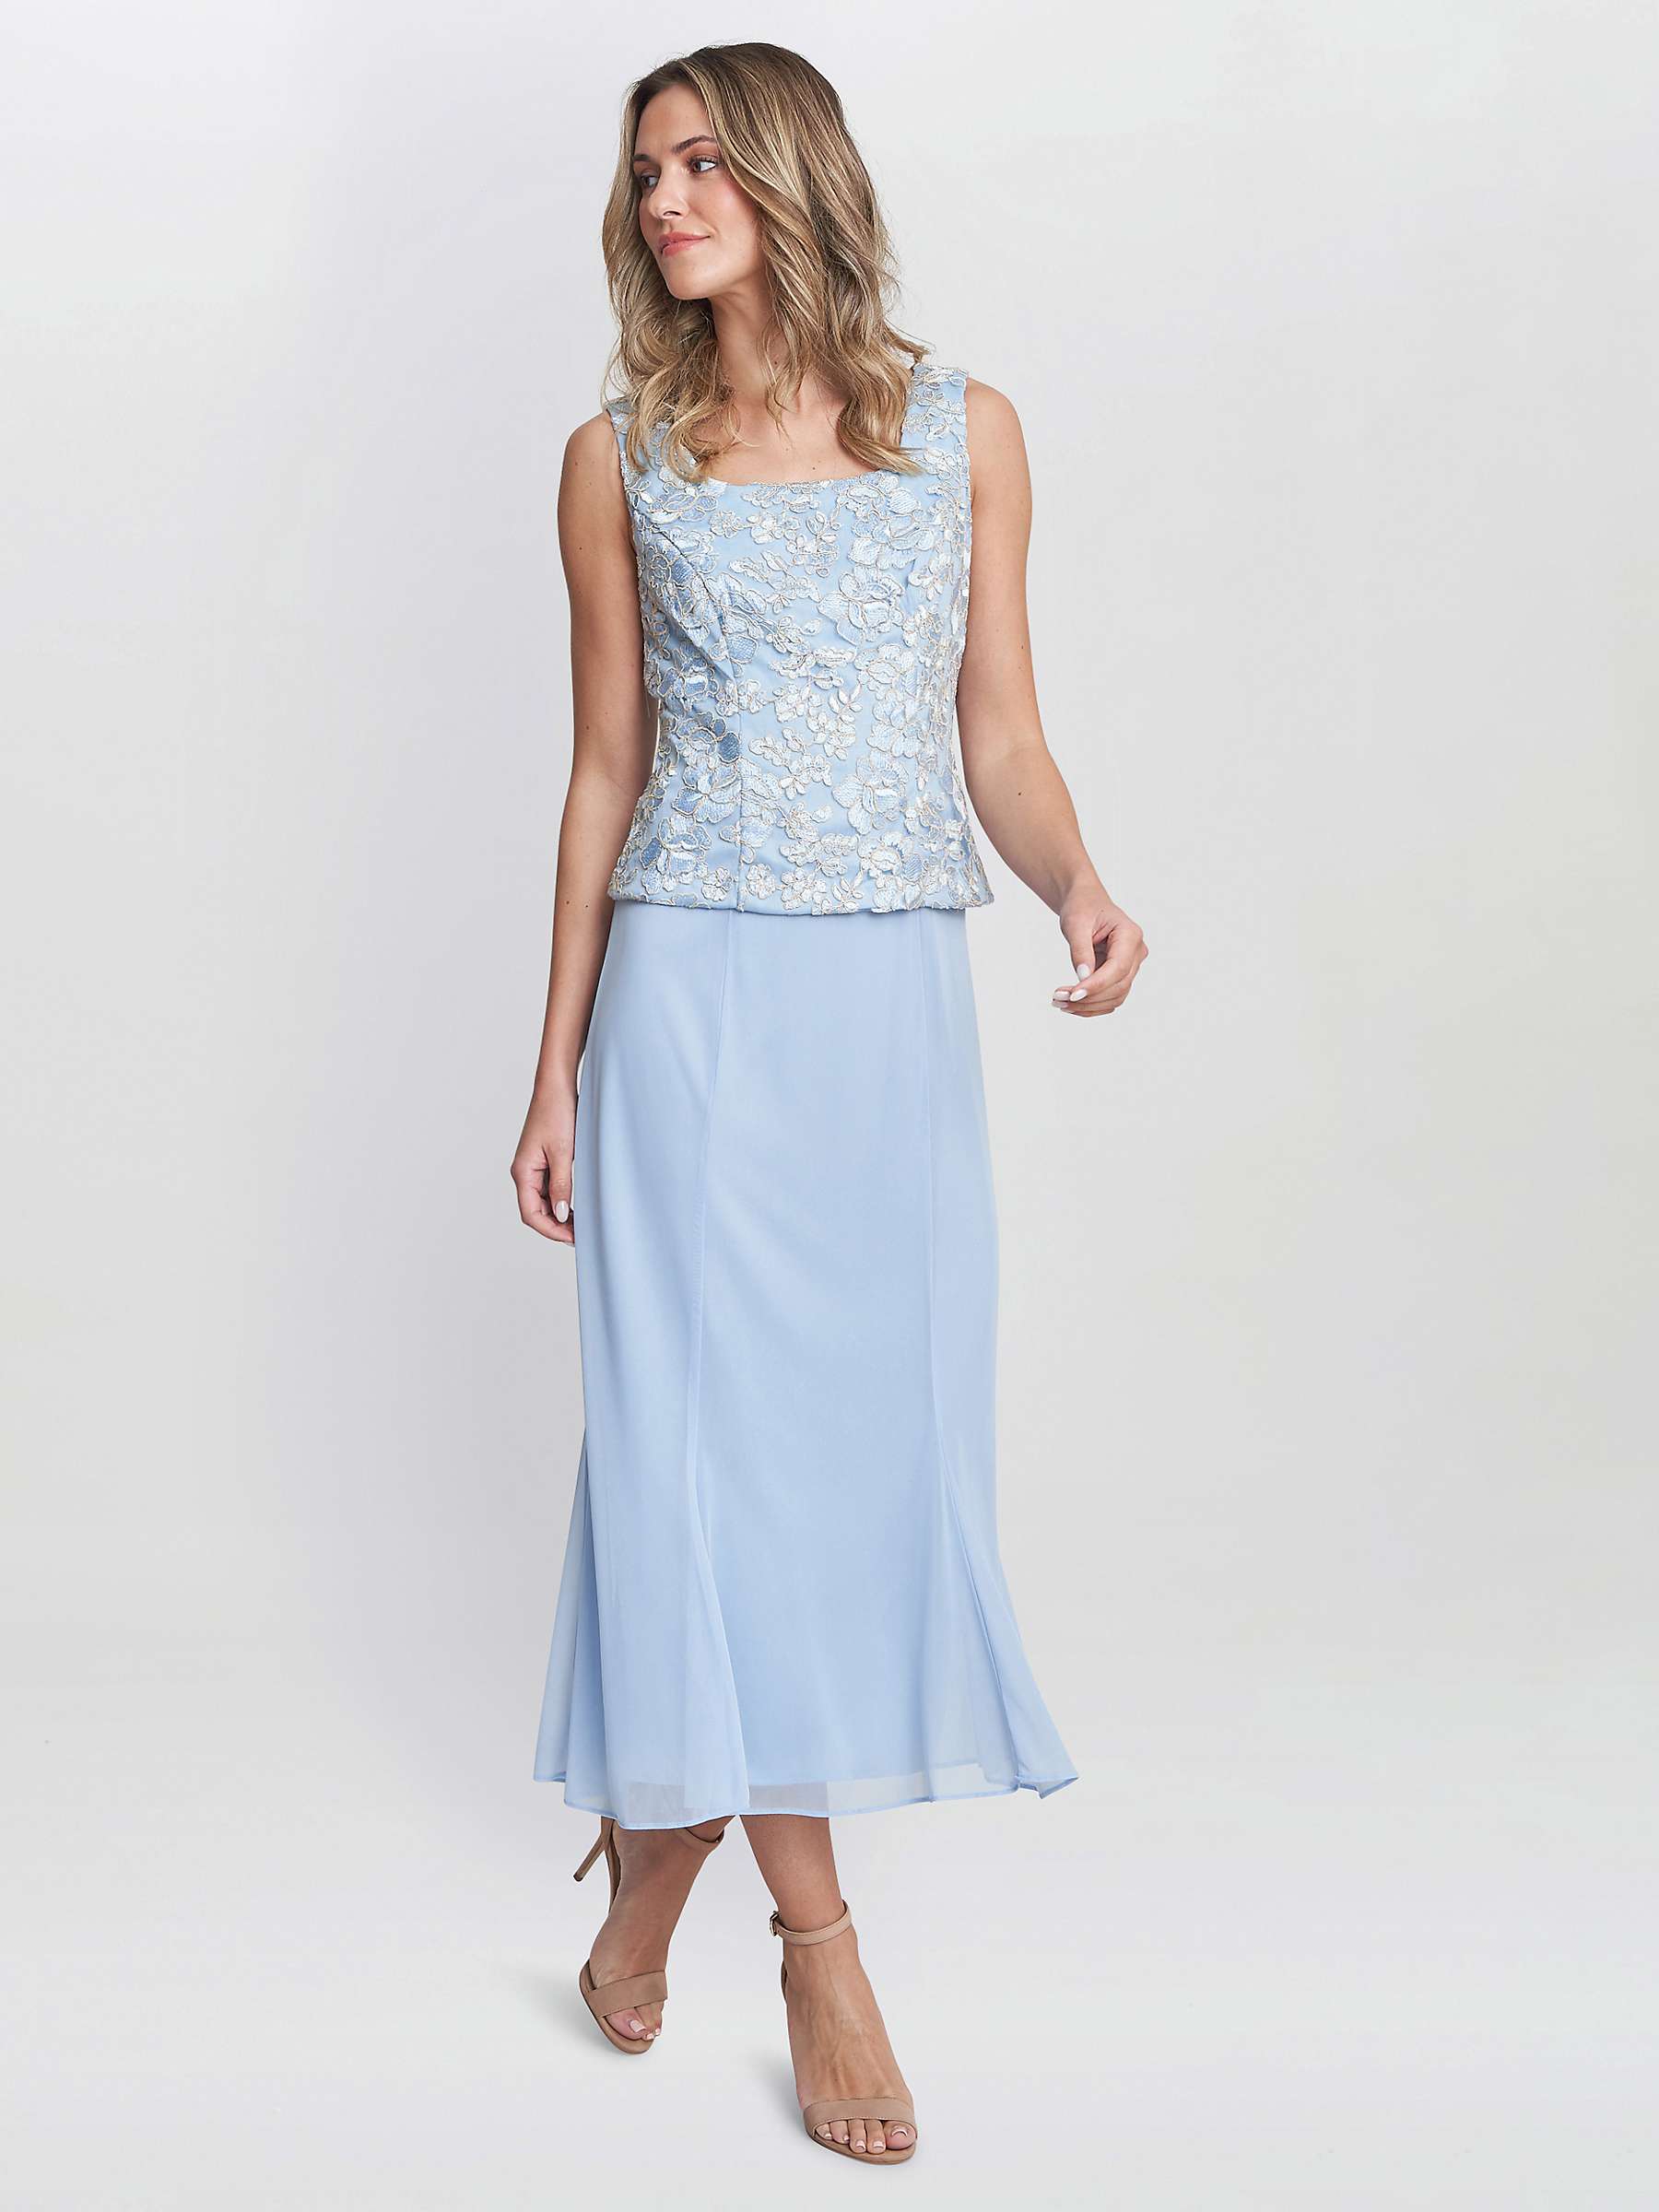 Buy Gina Bacconi Joyce Embroidered Lace Jacket And Midi Dress, Light Blue Online at johnlewis.com